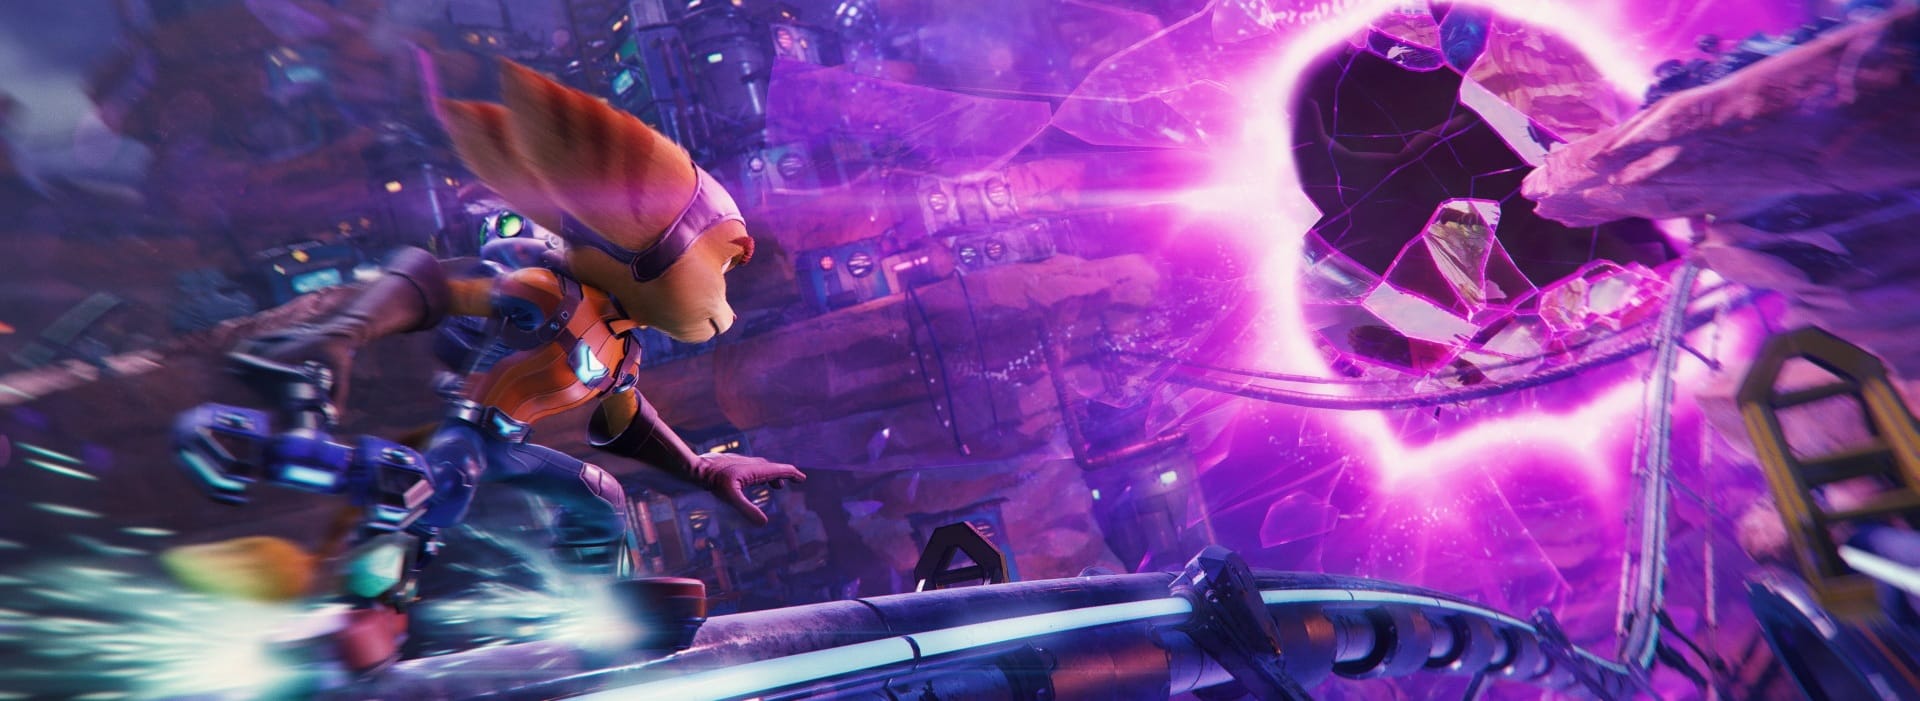 Ratchet and Clank Rift Apart Can Run at 60 FPS on PlayStation 5